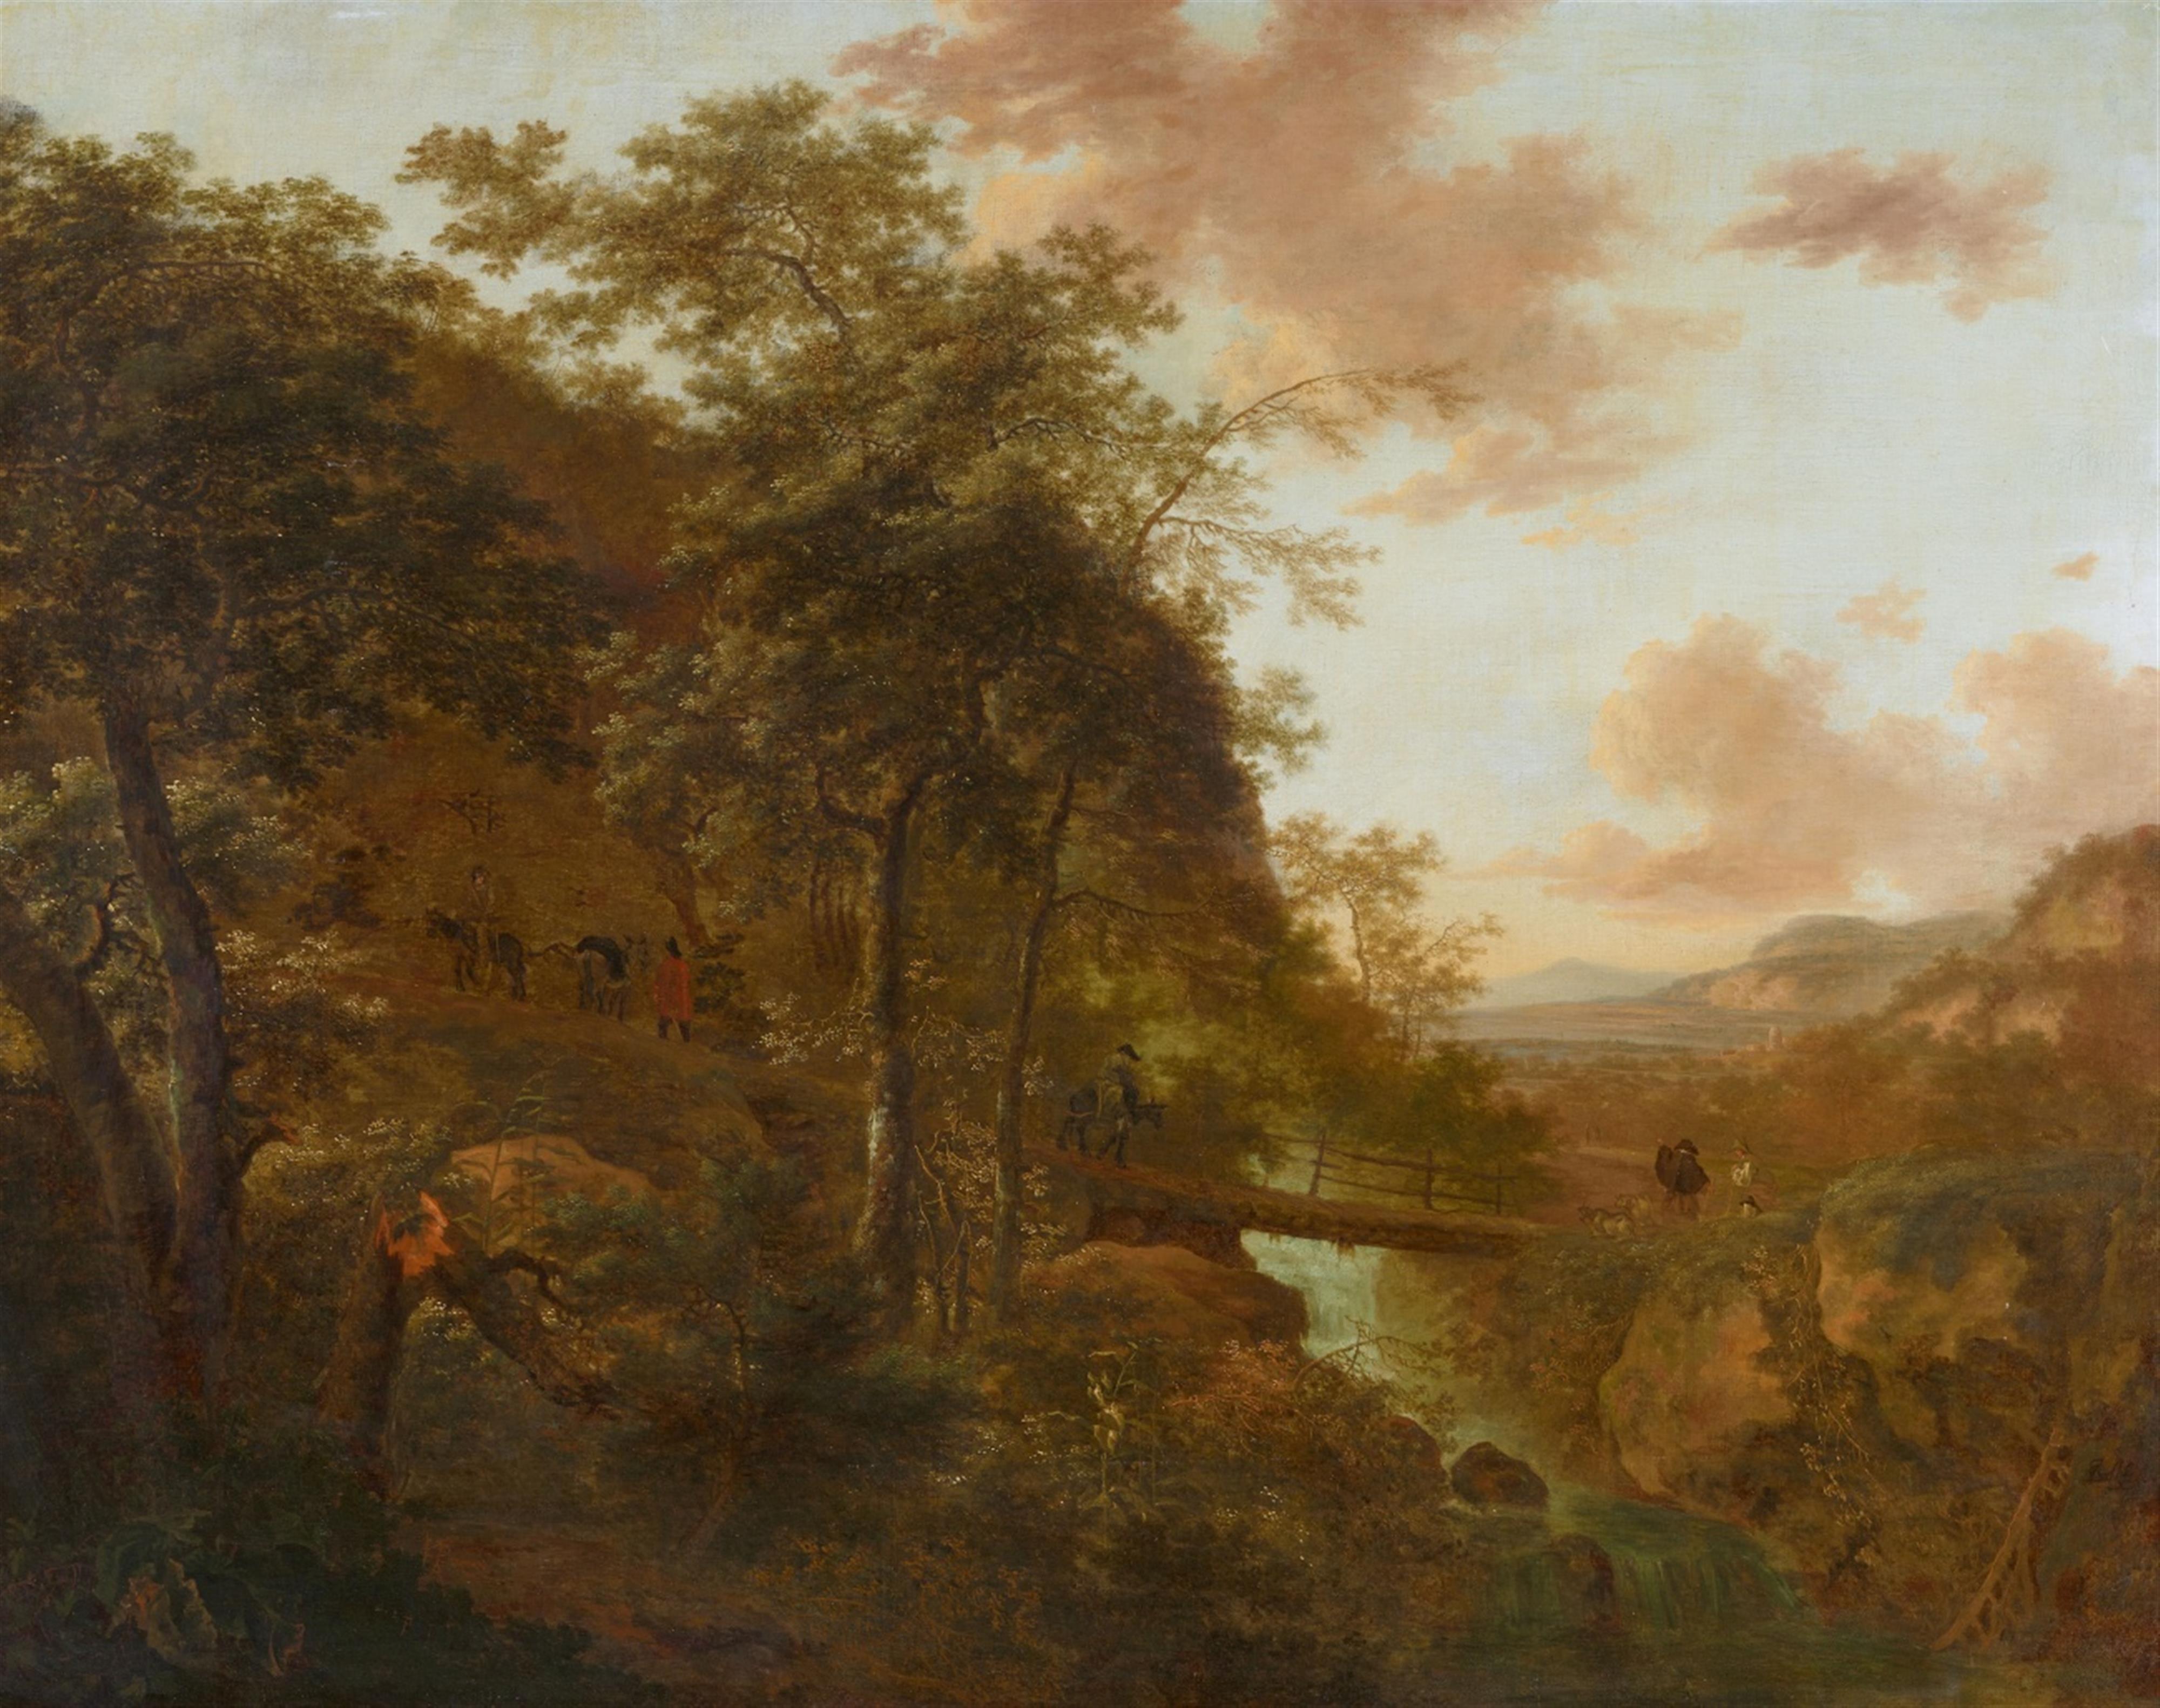 Jan Both, attributed to - Southern Mountain Landscape with a Bridge and Shepherds - image-1